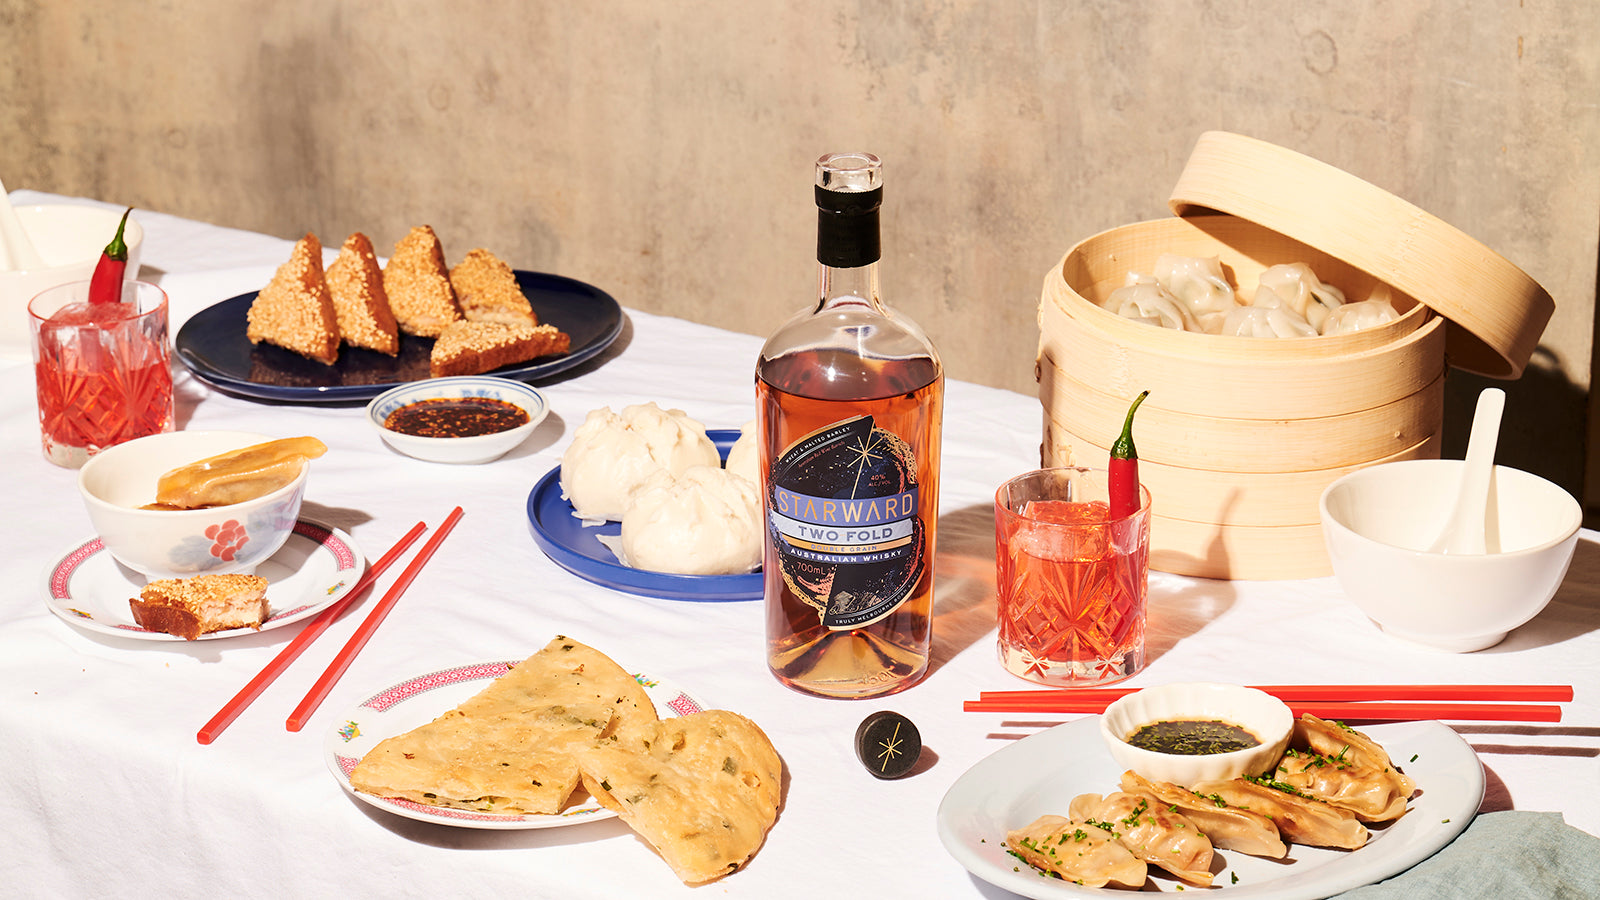 Two-Fold Starward Whisky on a table with the best asian food